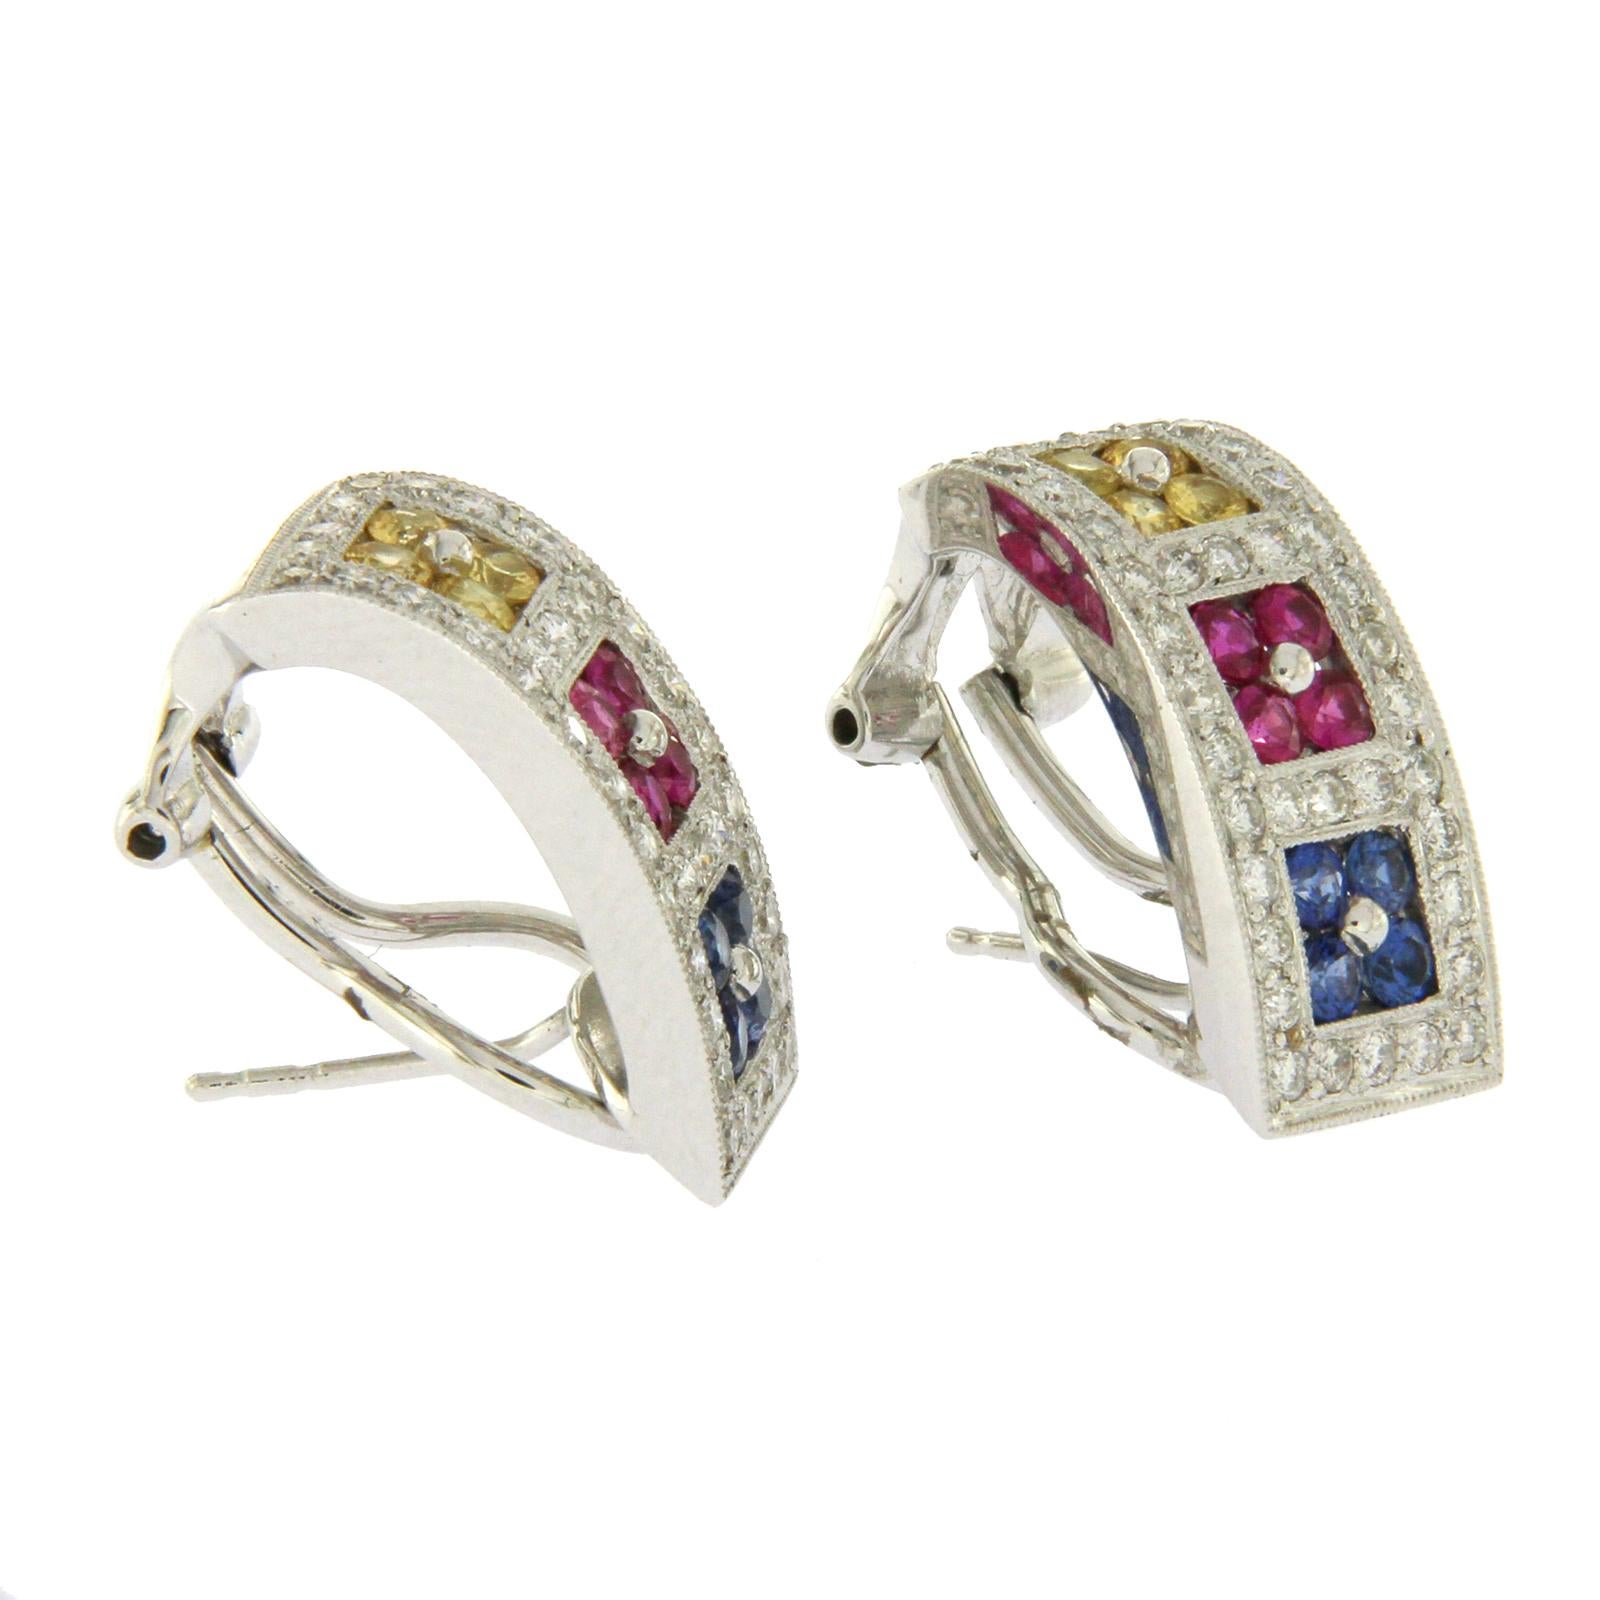 Type: Earrings
Height:20 mm
Width: 9 mm
Metal: White Gold
Metal Purity: 18K
Hallmarks: 18K
Total Weight: 8.9 Grams
Stone Type: 0.93 Ct Diamonds VS2 G-F 1.38 CT Natural Multi Sapphire
Condition: New
Stock Number: BL123